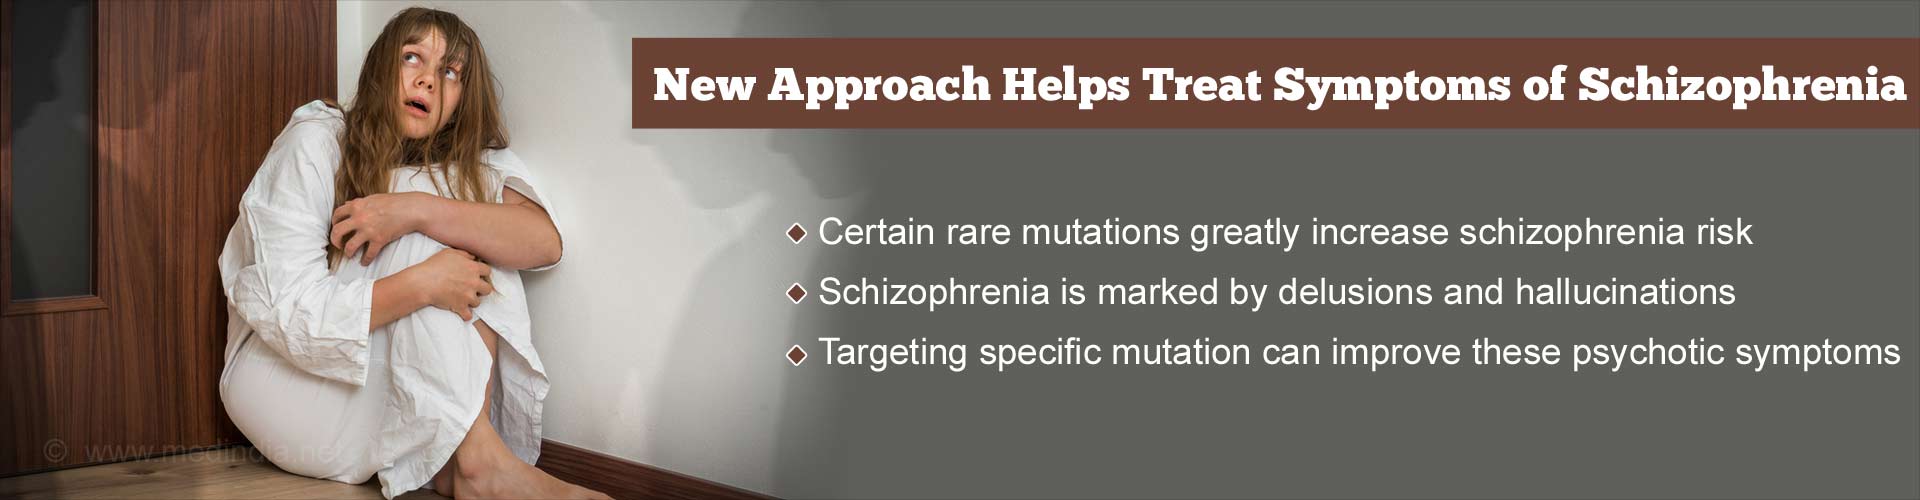 New approach helps treat symptoms of schizophrenia. Certain rare mutations greatly increase schizophrenia risk. Schizophrenia is marked by delusions and hallucinations. Targeting specific mutation can improve these psychotic symptoms.